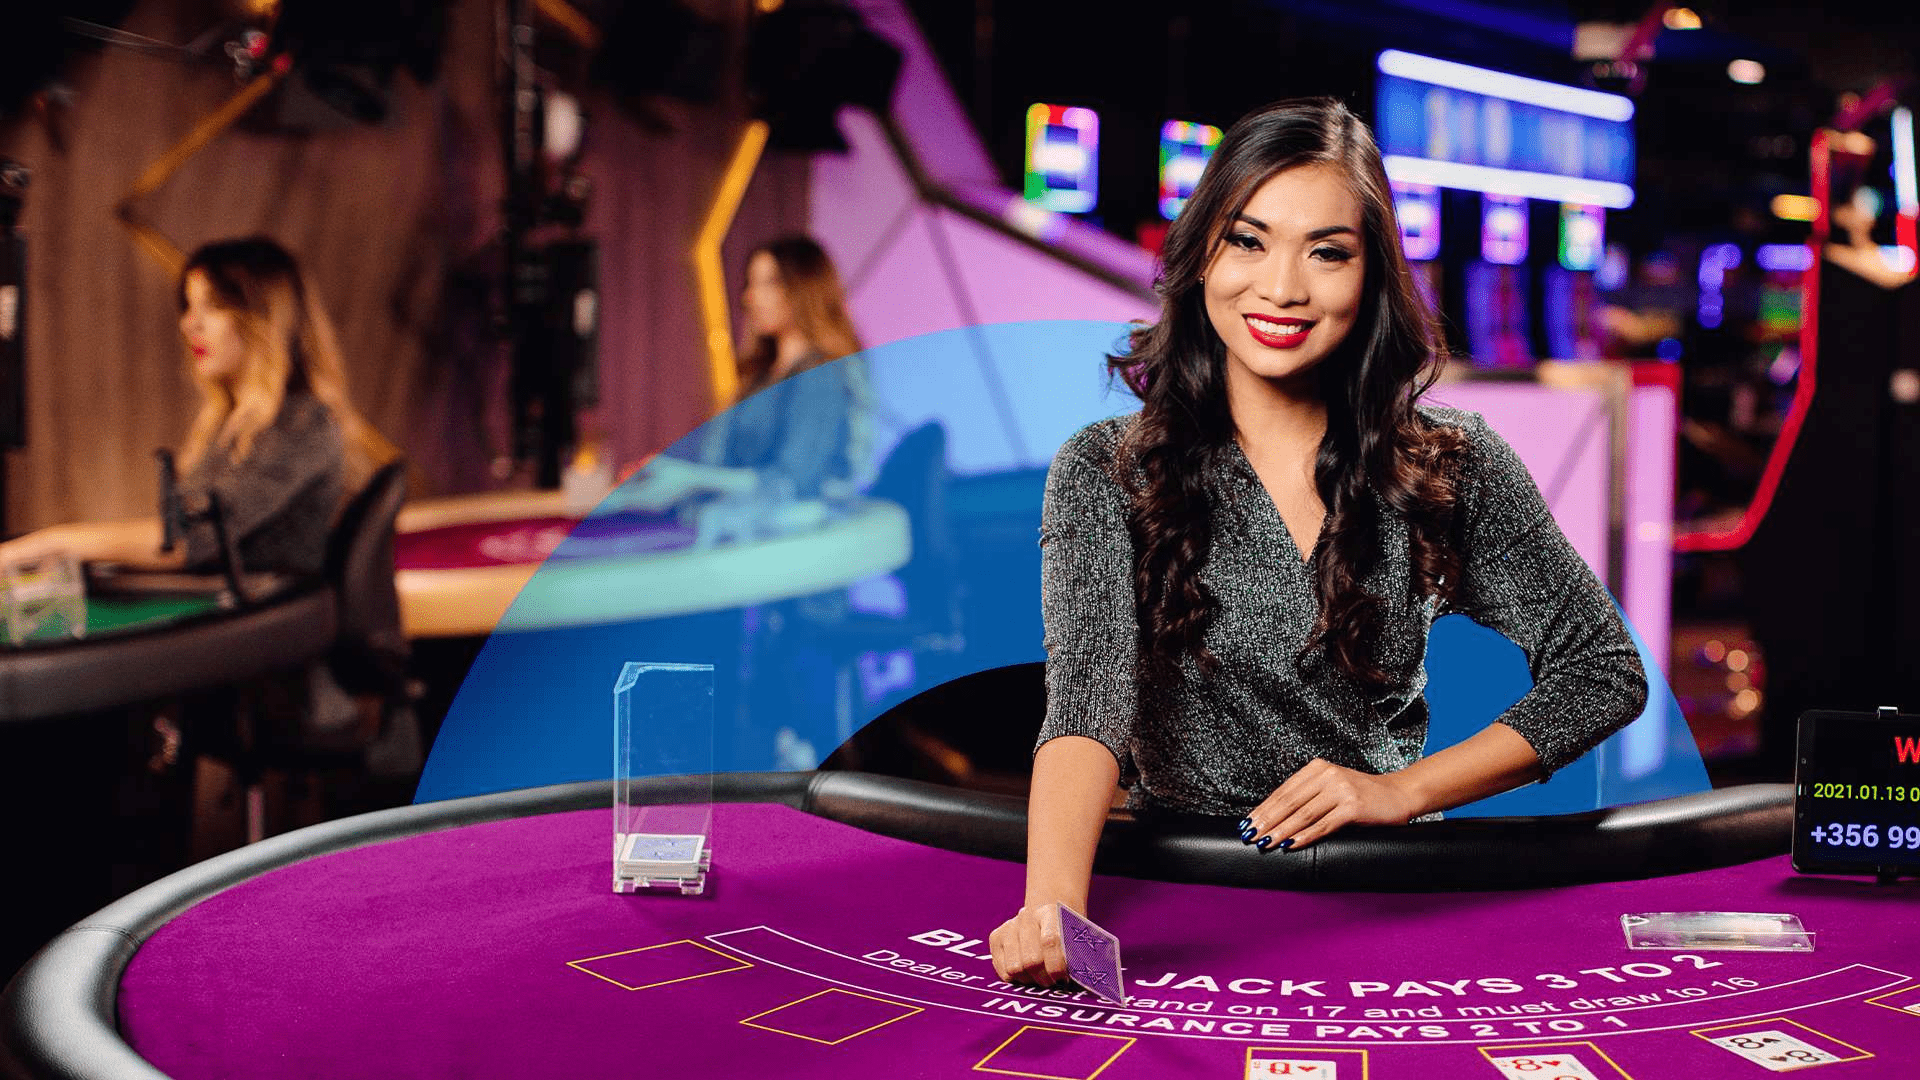 50 Ways Progressive jackpots at online casinos in India Can Make You Invincible